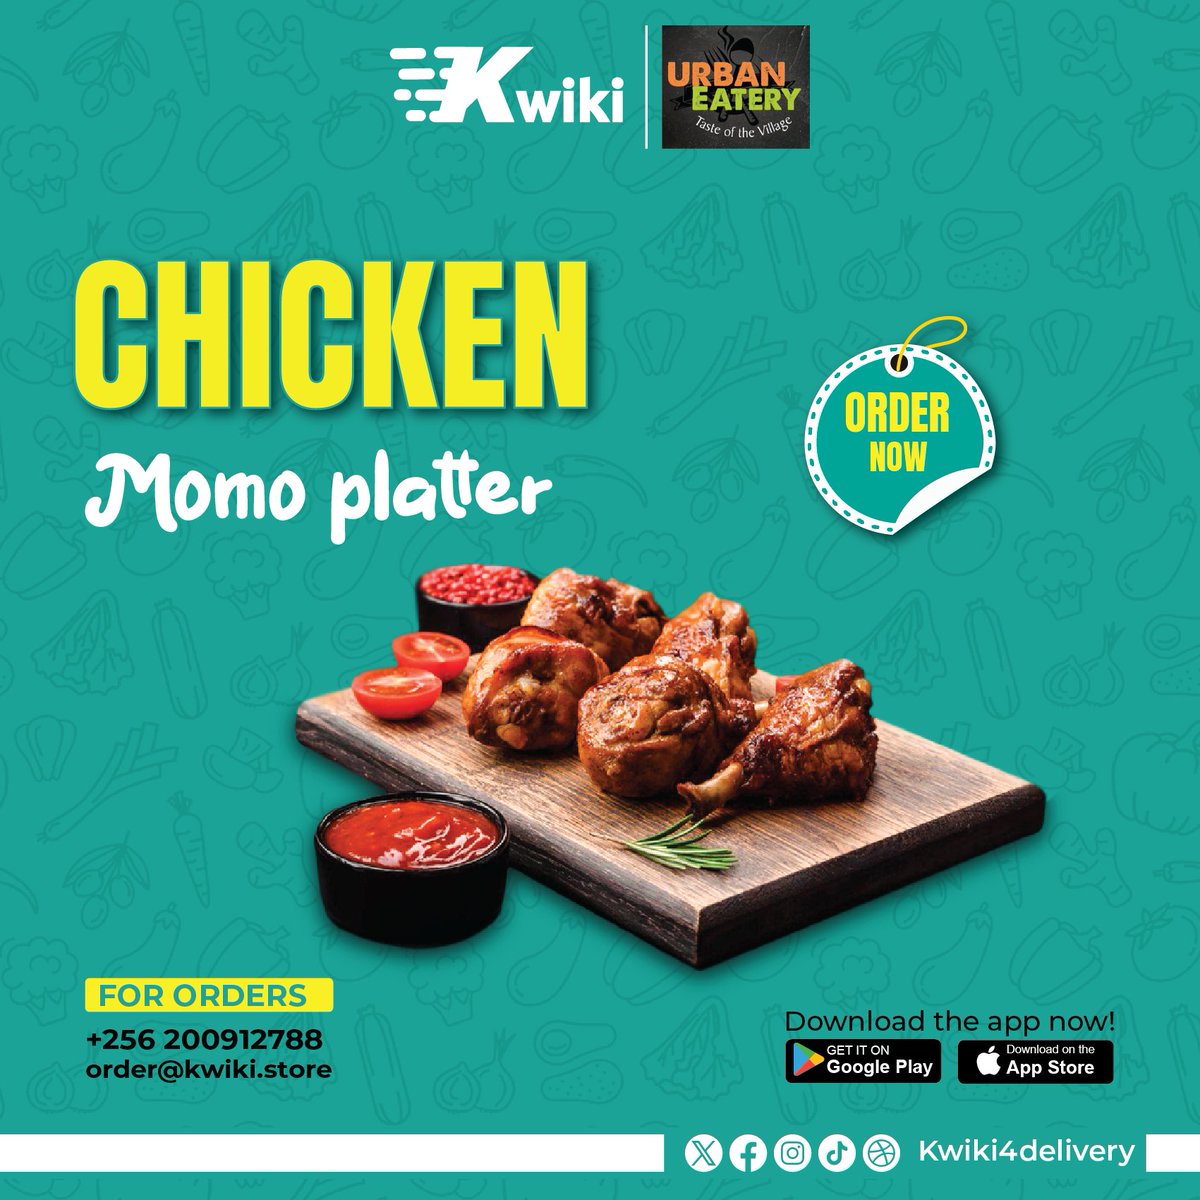 'Hi, you can please order the Chicken Momo Platter from Urban Eatery for delivery.'

#kwikidelivery #kwiki #opennow #alwaysontime #doitquickwithkwiki #uganda #food #foodporn #fooddelivery #fastdelivery #itskwiki #fy #ordernow #lunch #fooddelicious #ordereveryday #ordernow